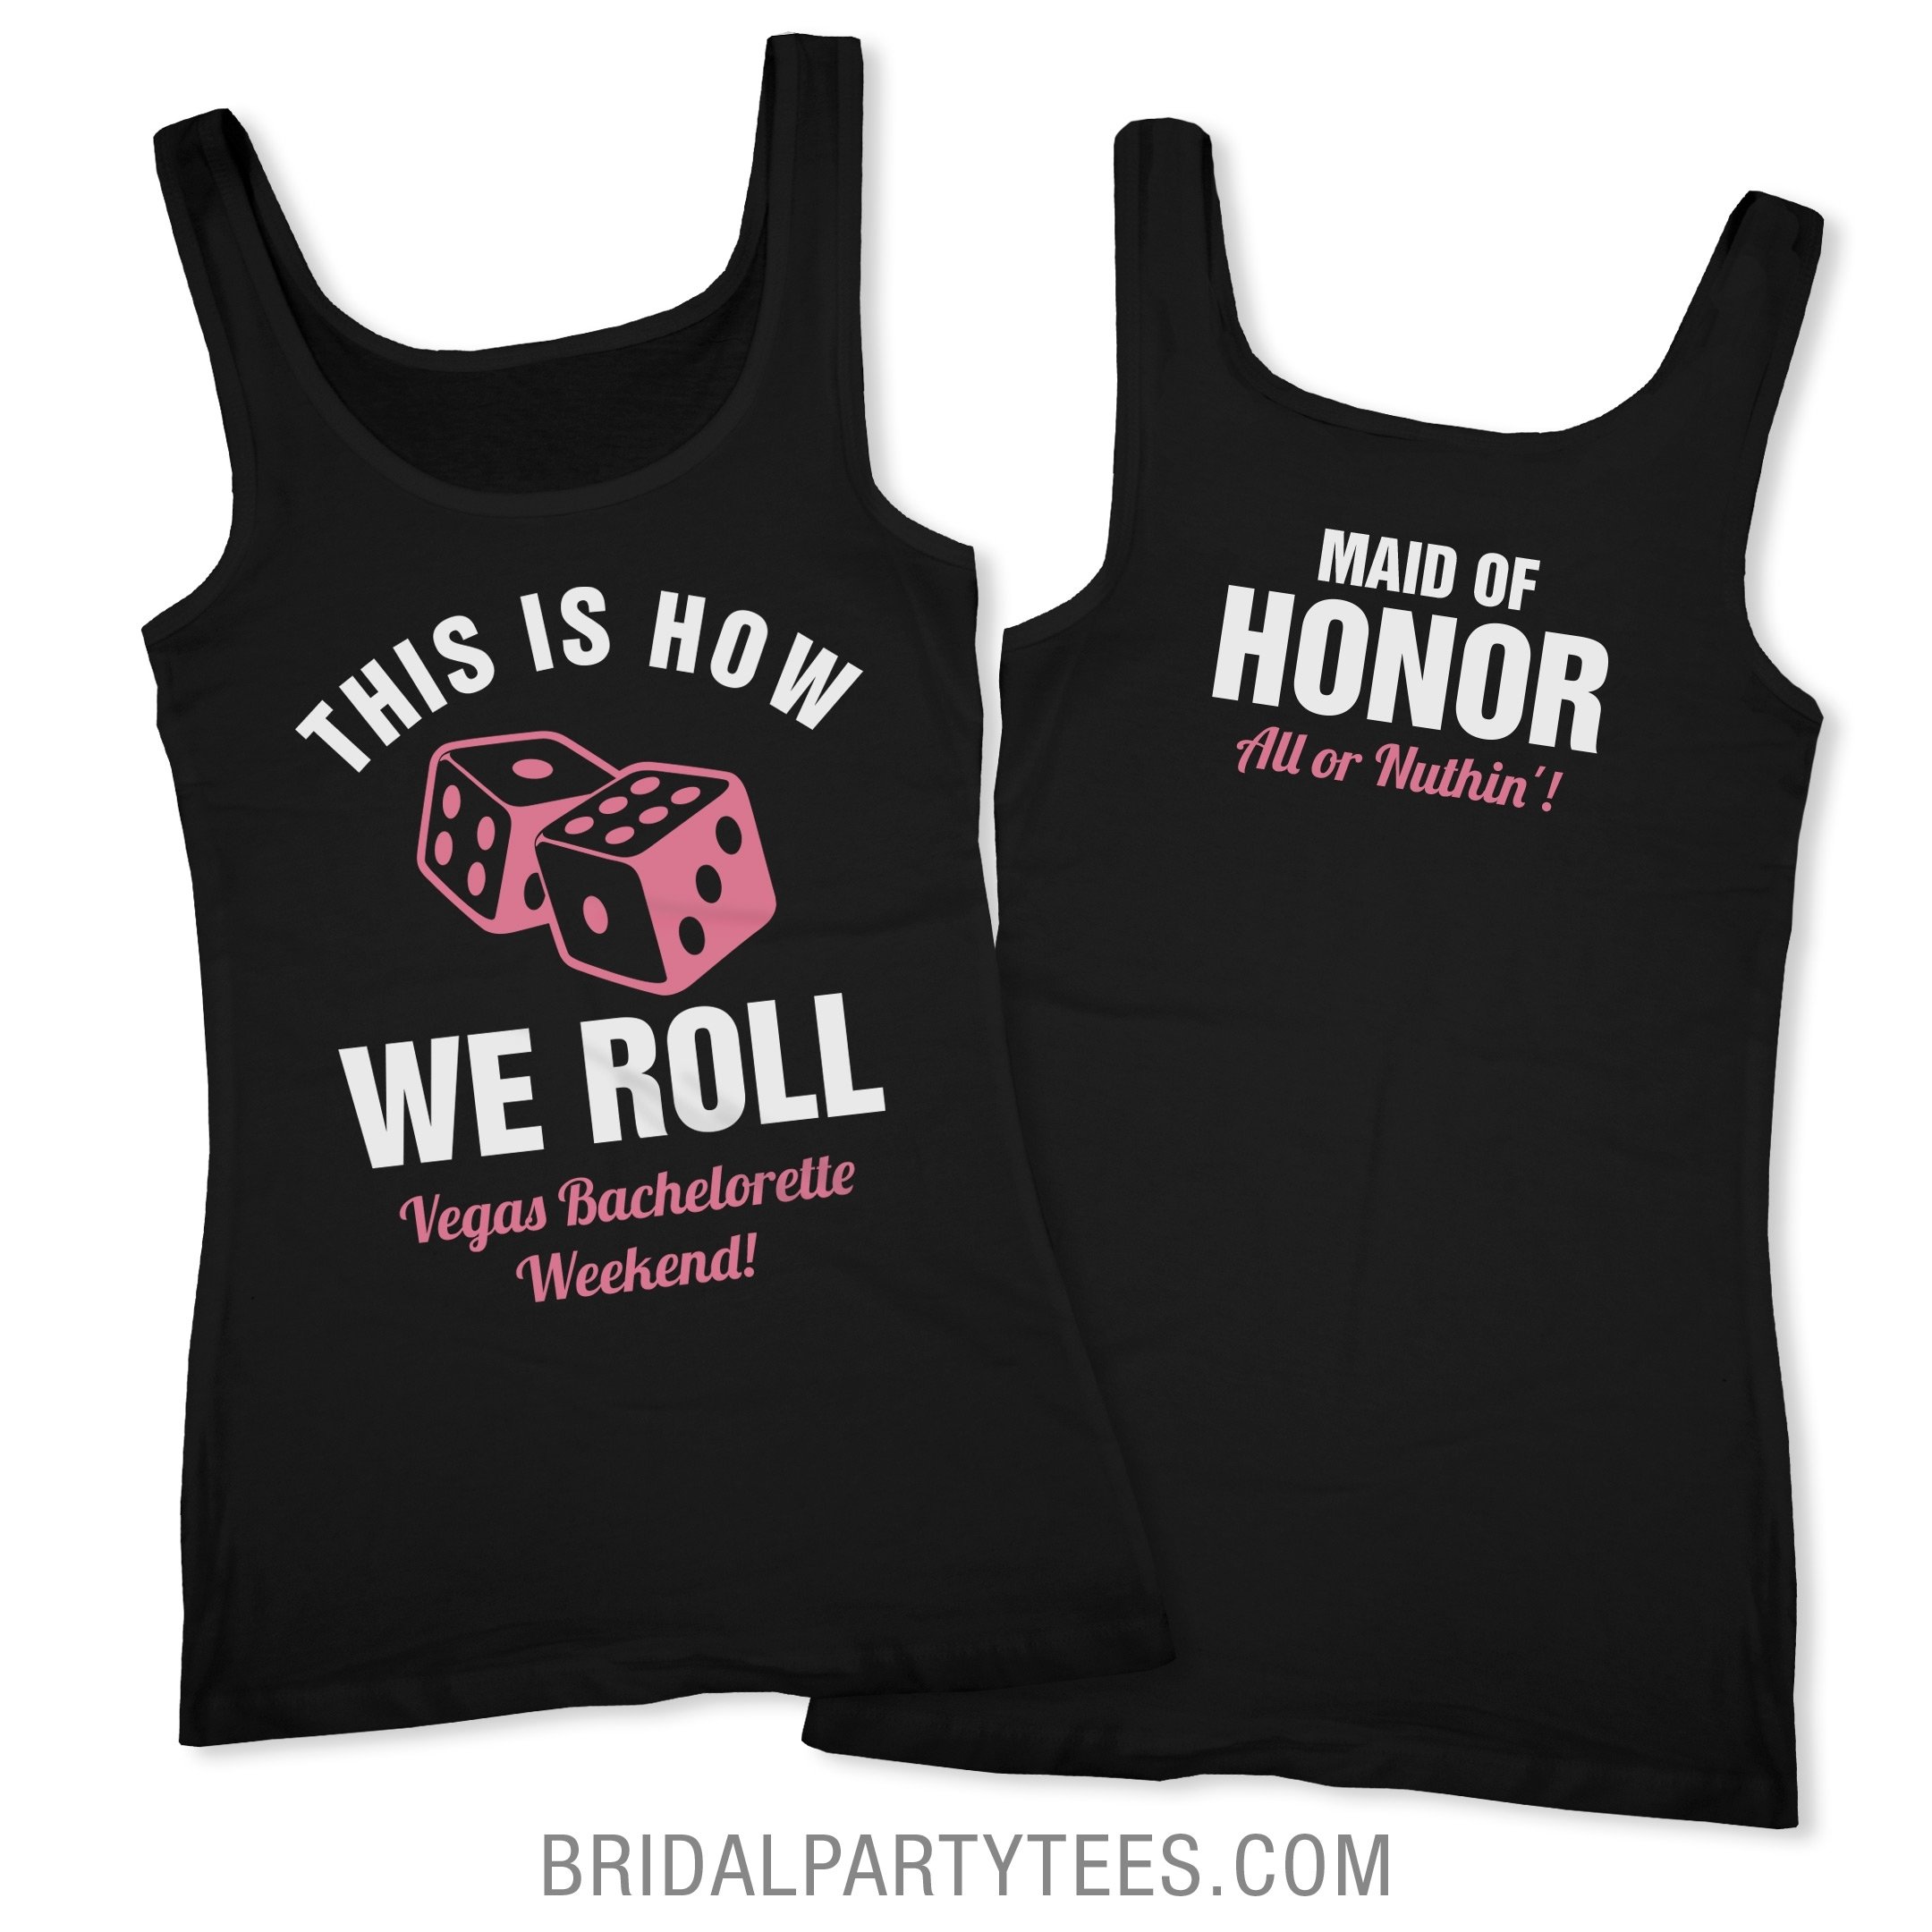 10 Attractive Bachelorette Party T Shirt Ideas wedding shirts for bride atdisability 2022